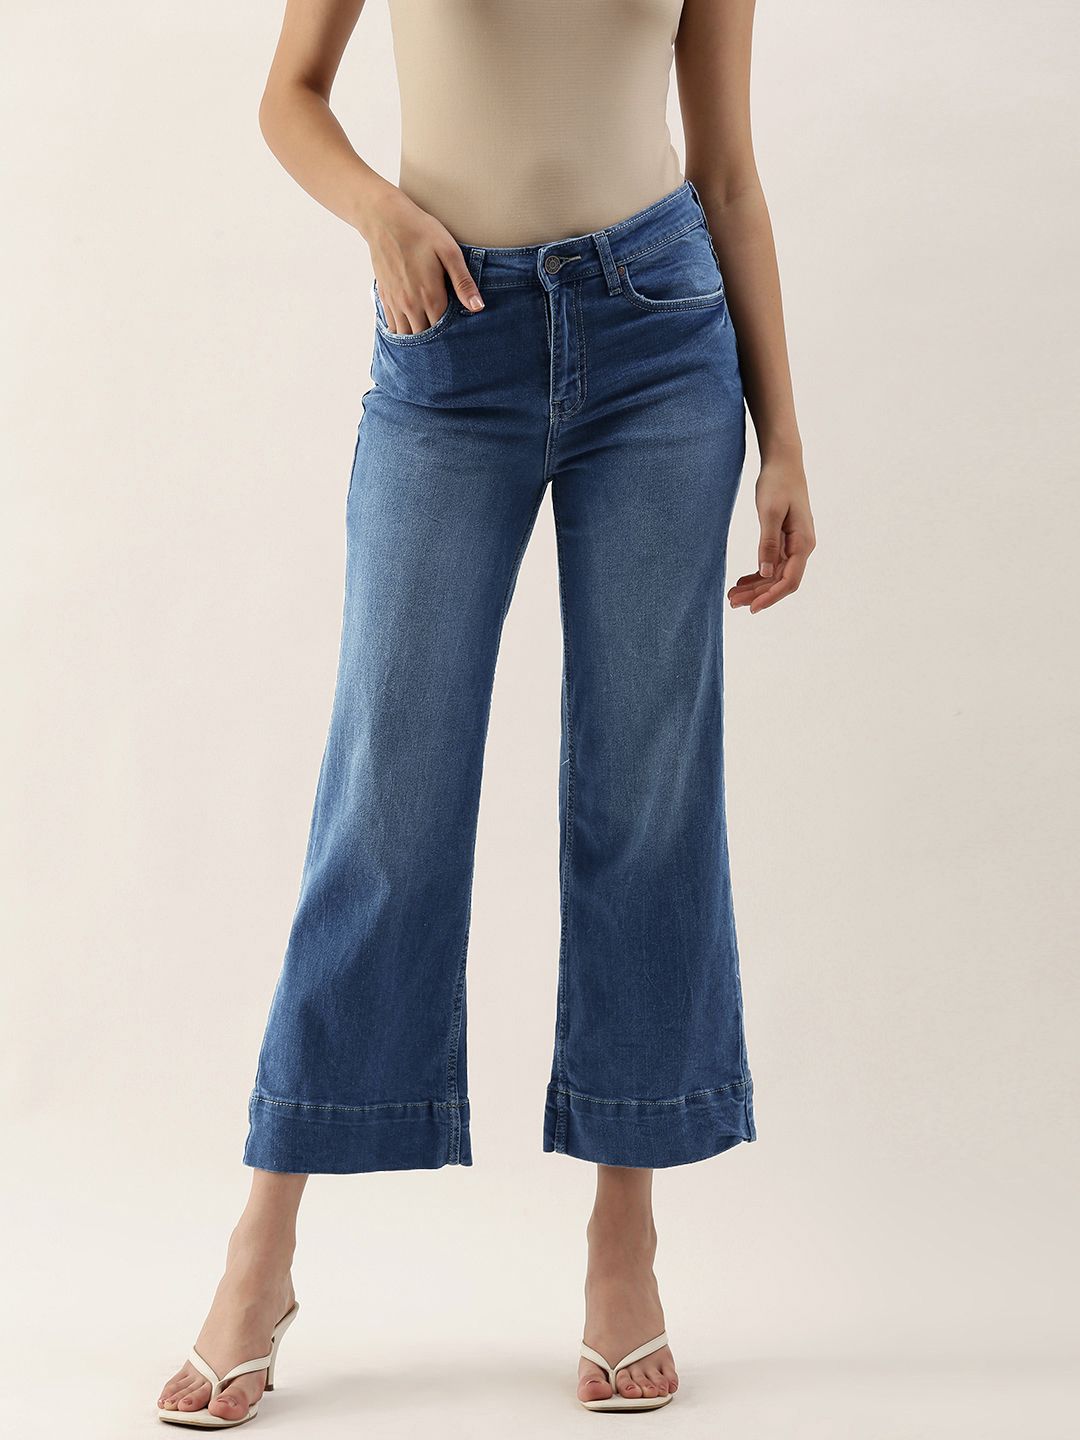 AND Women Blue Flared Light Fade Stretchable Jeans Price in India